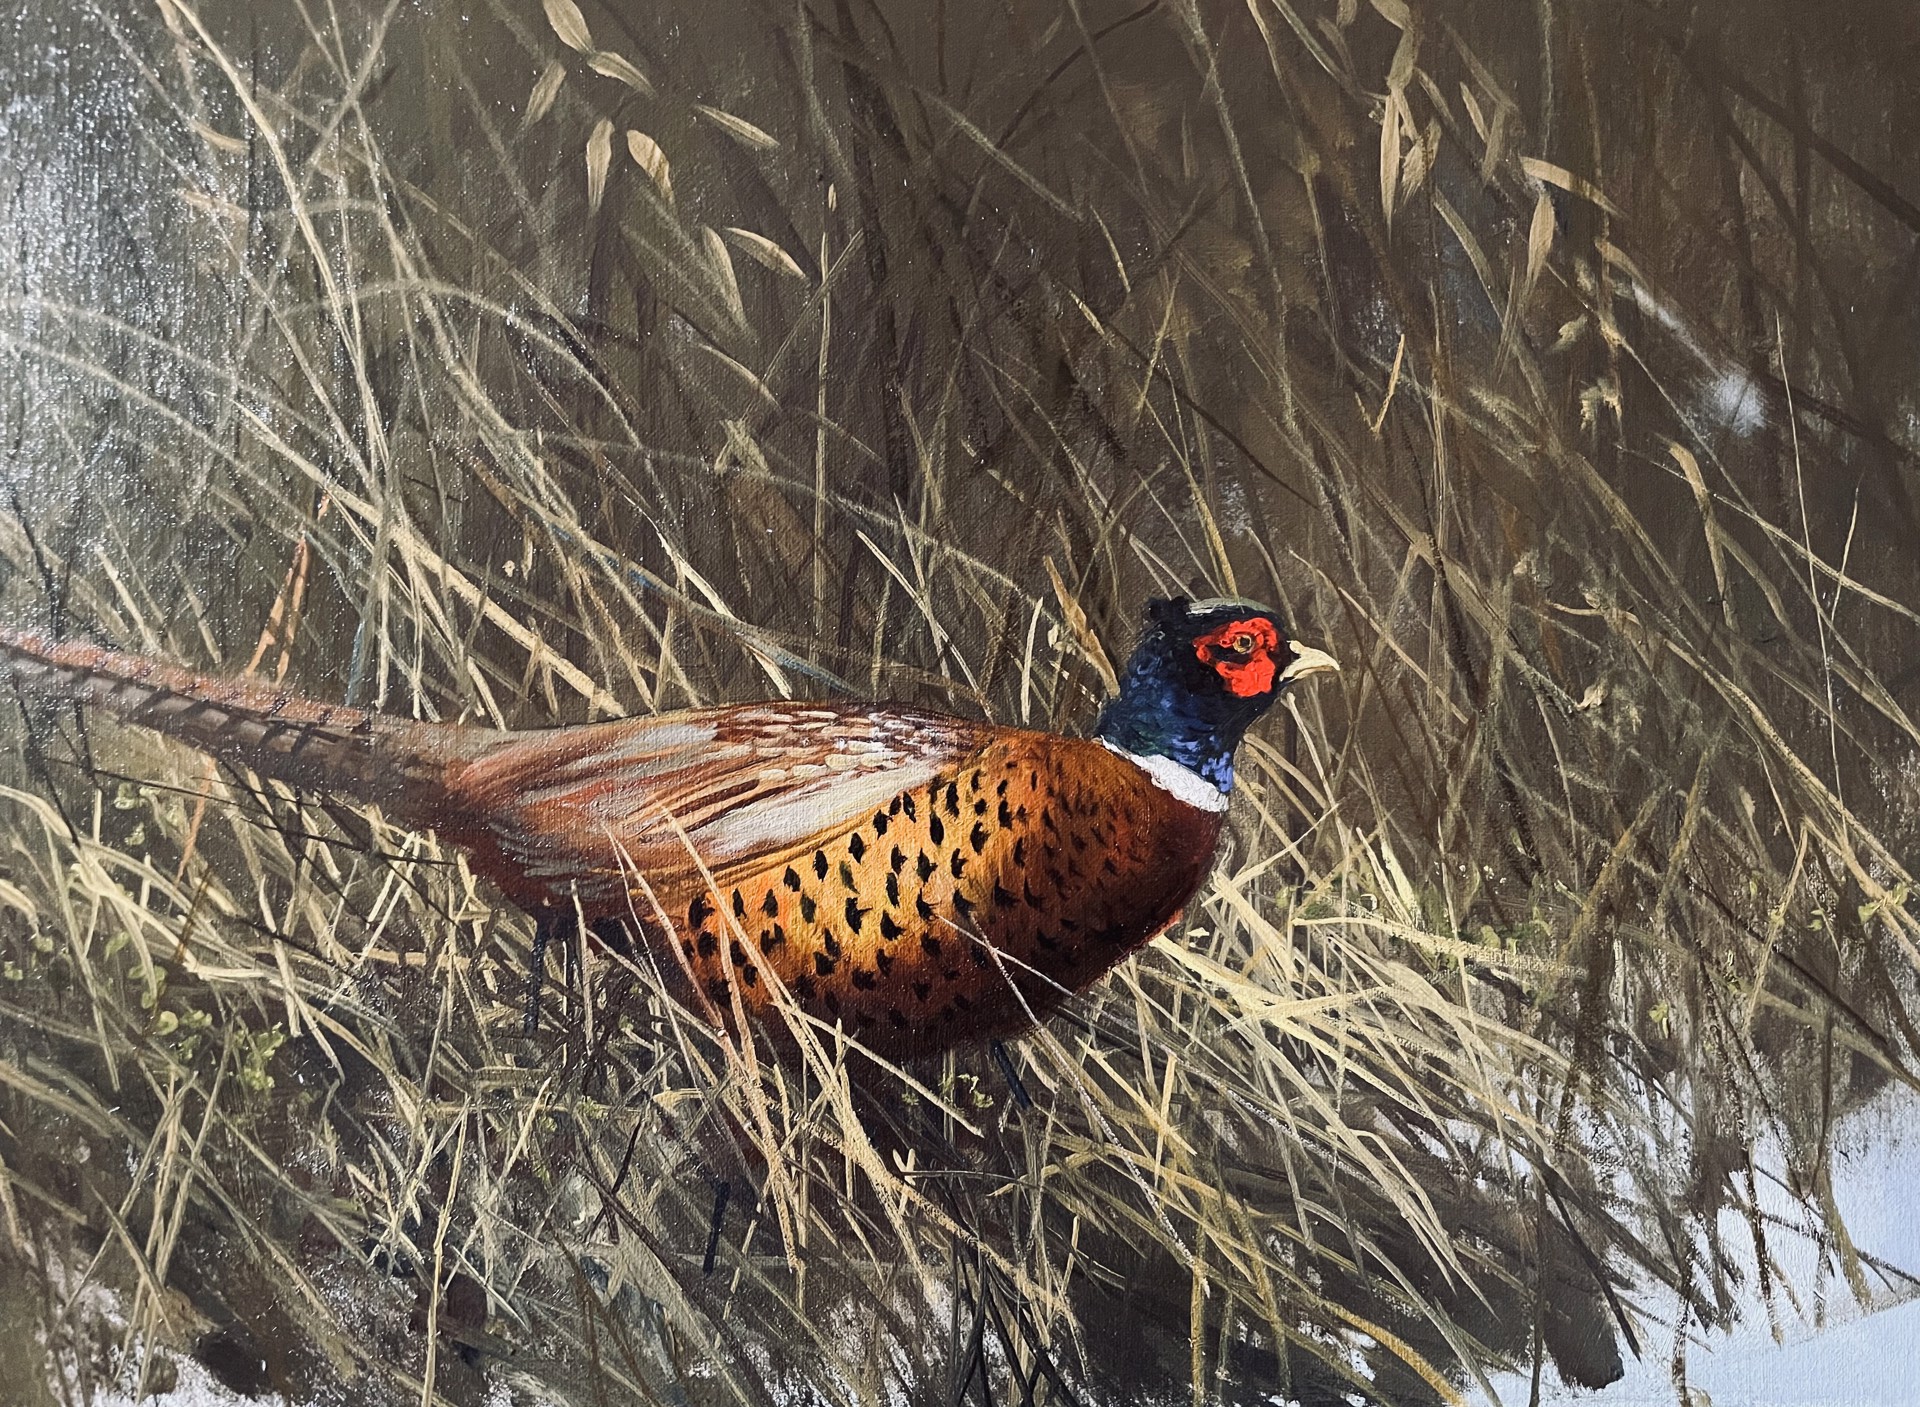 PHEASANT IN SNOW by Michael Coleman